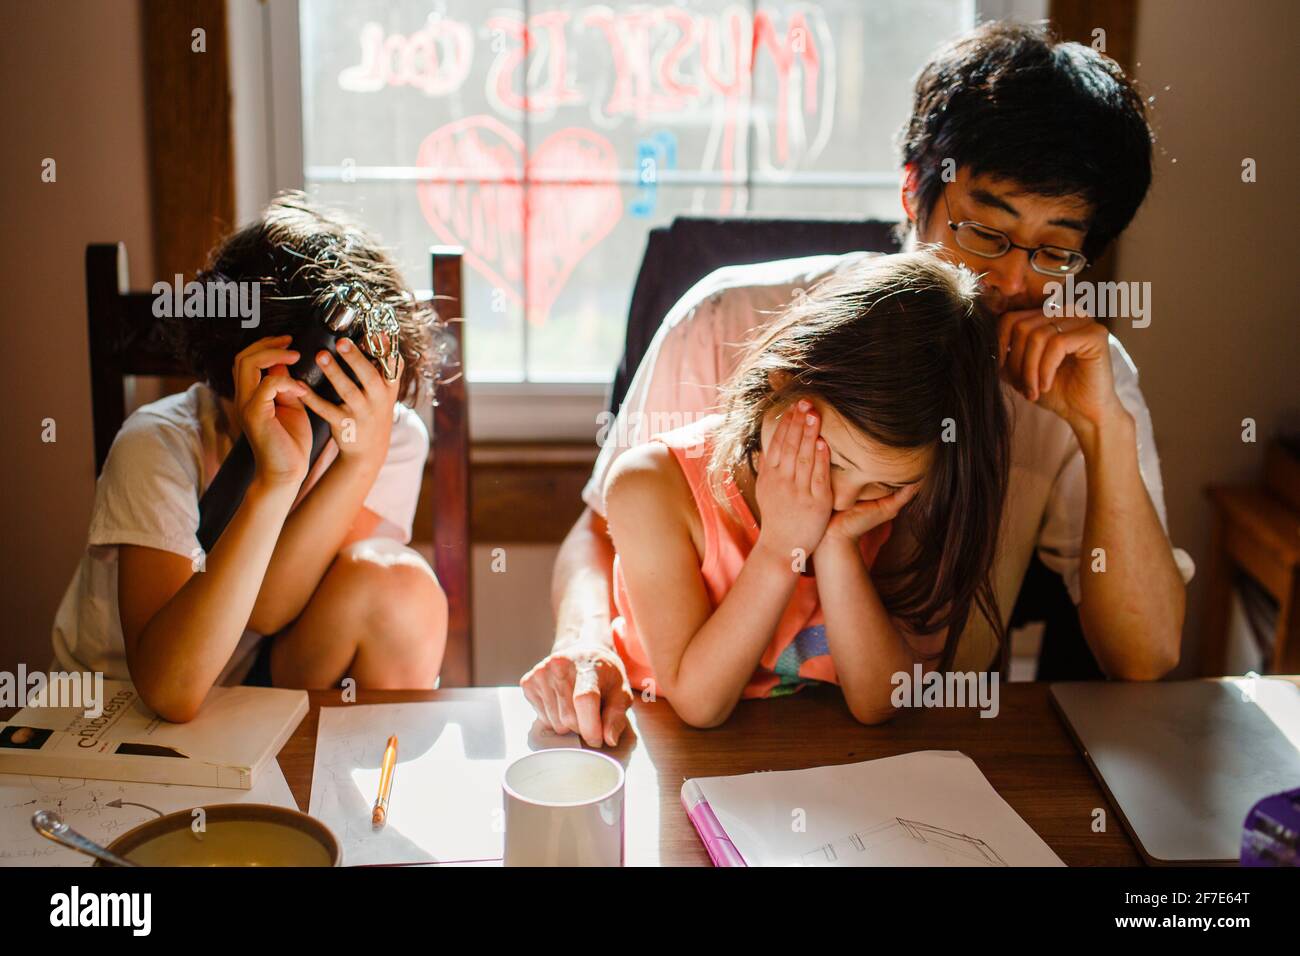 two unhappy children with head in hands sit with tired father at table Stock Photo